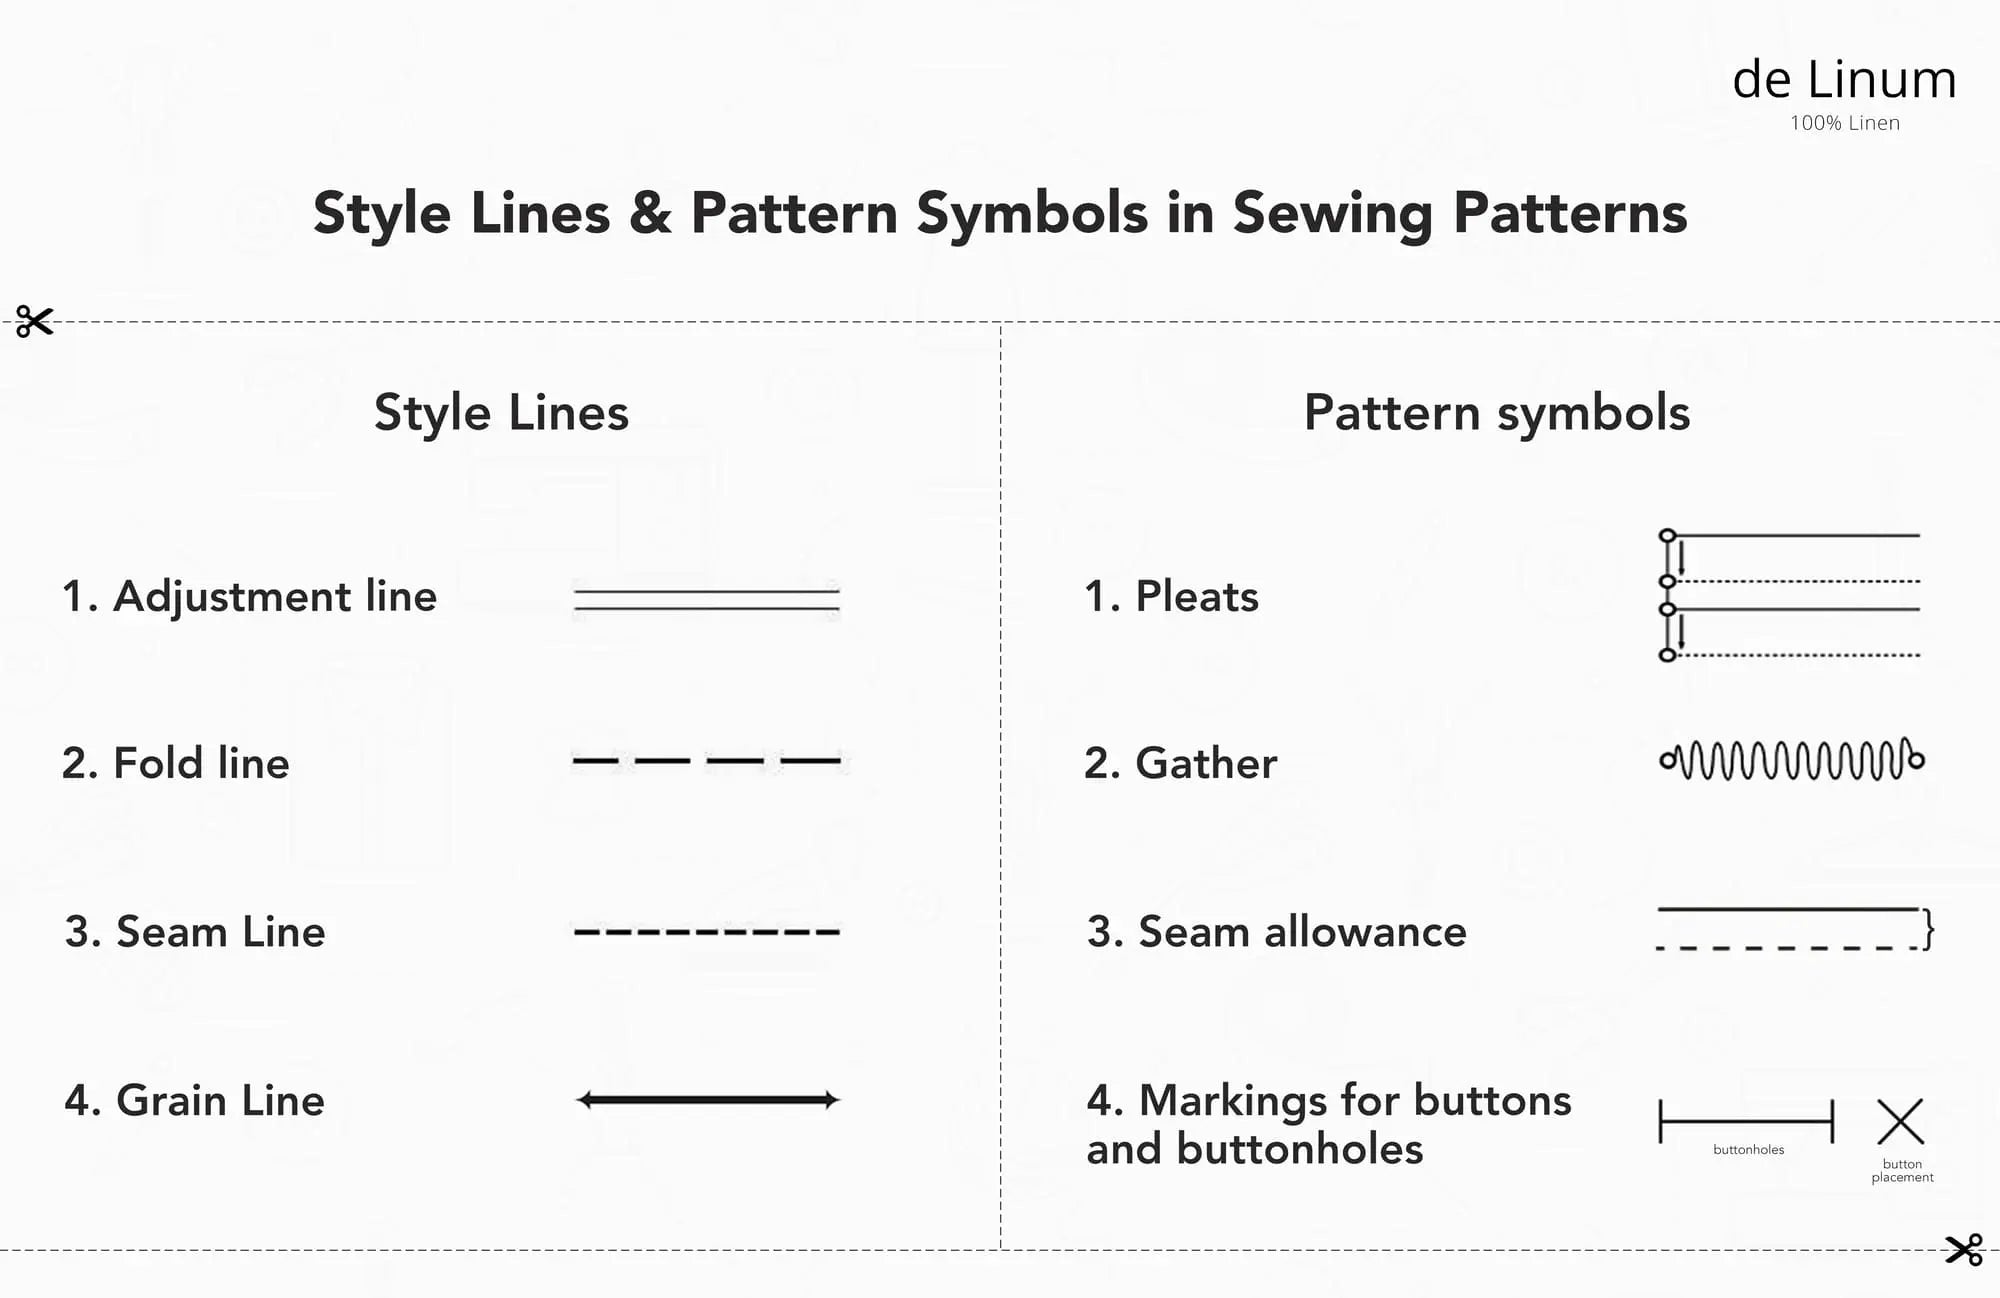 Style Line & Patter Symbols in Sewing Patterns